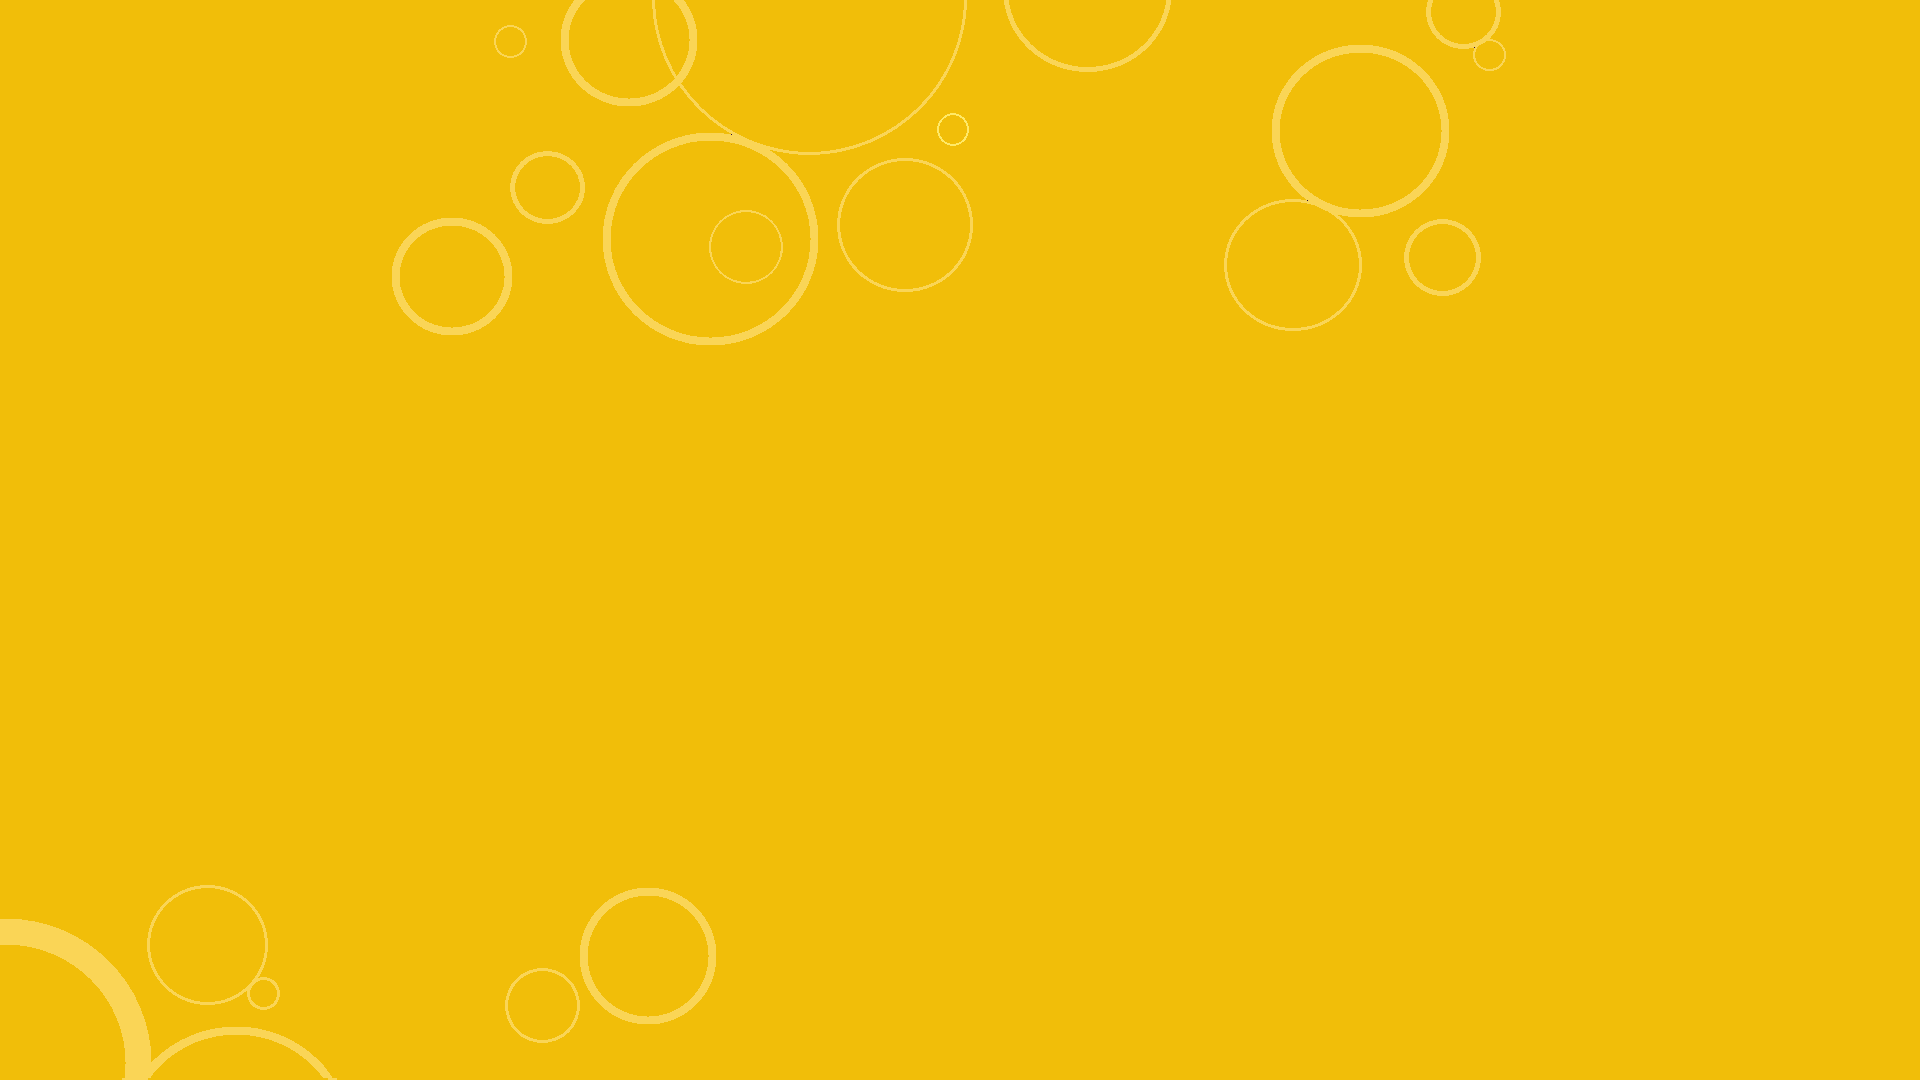 White Bubbles On Yellow Background Wallpaper H High